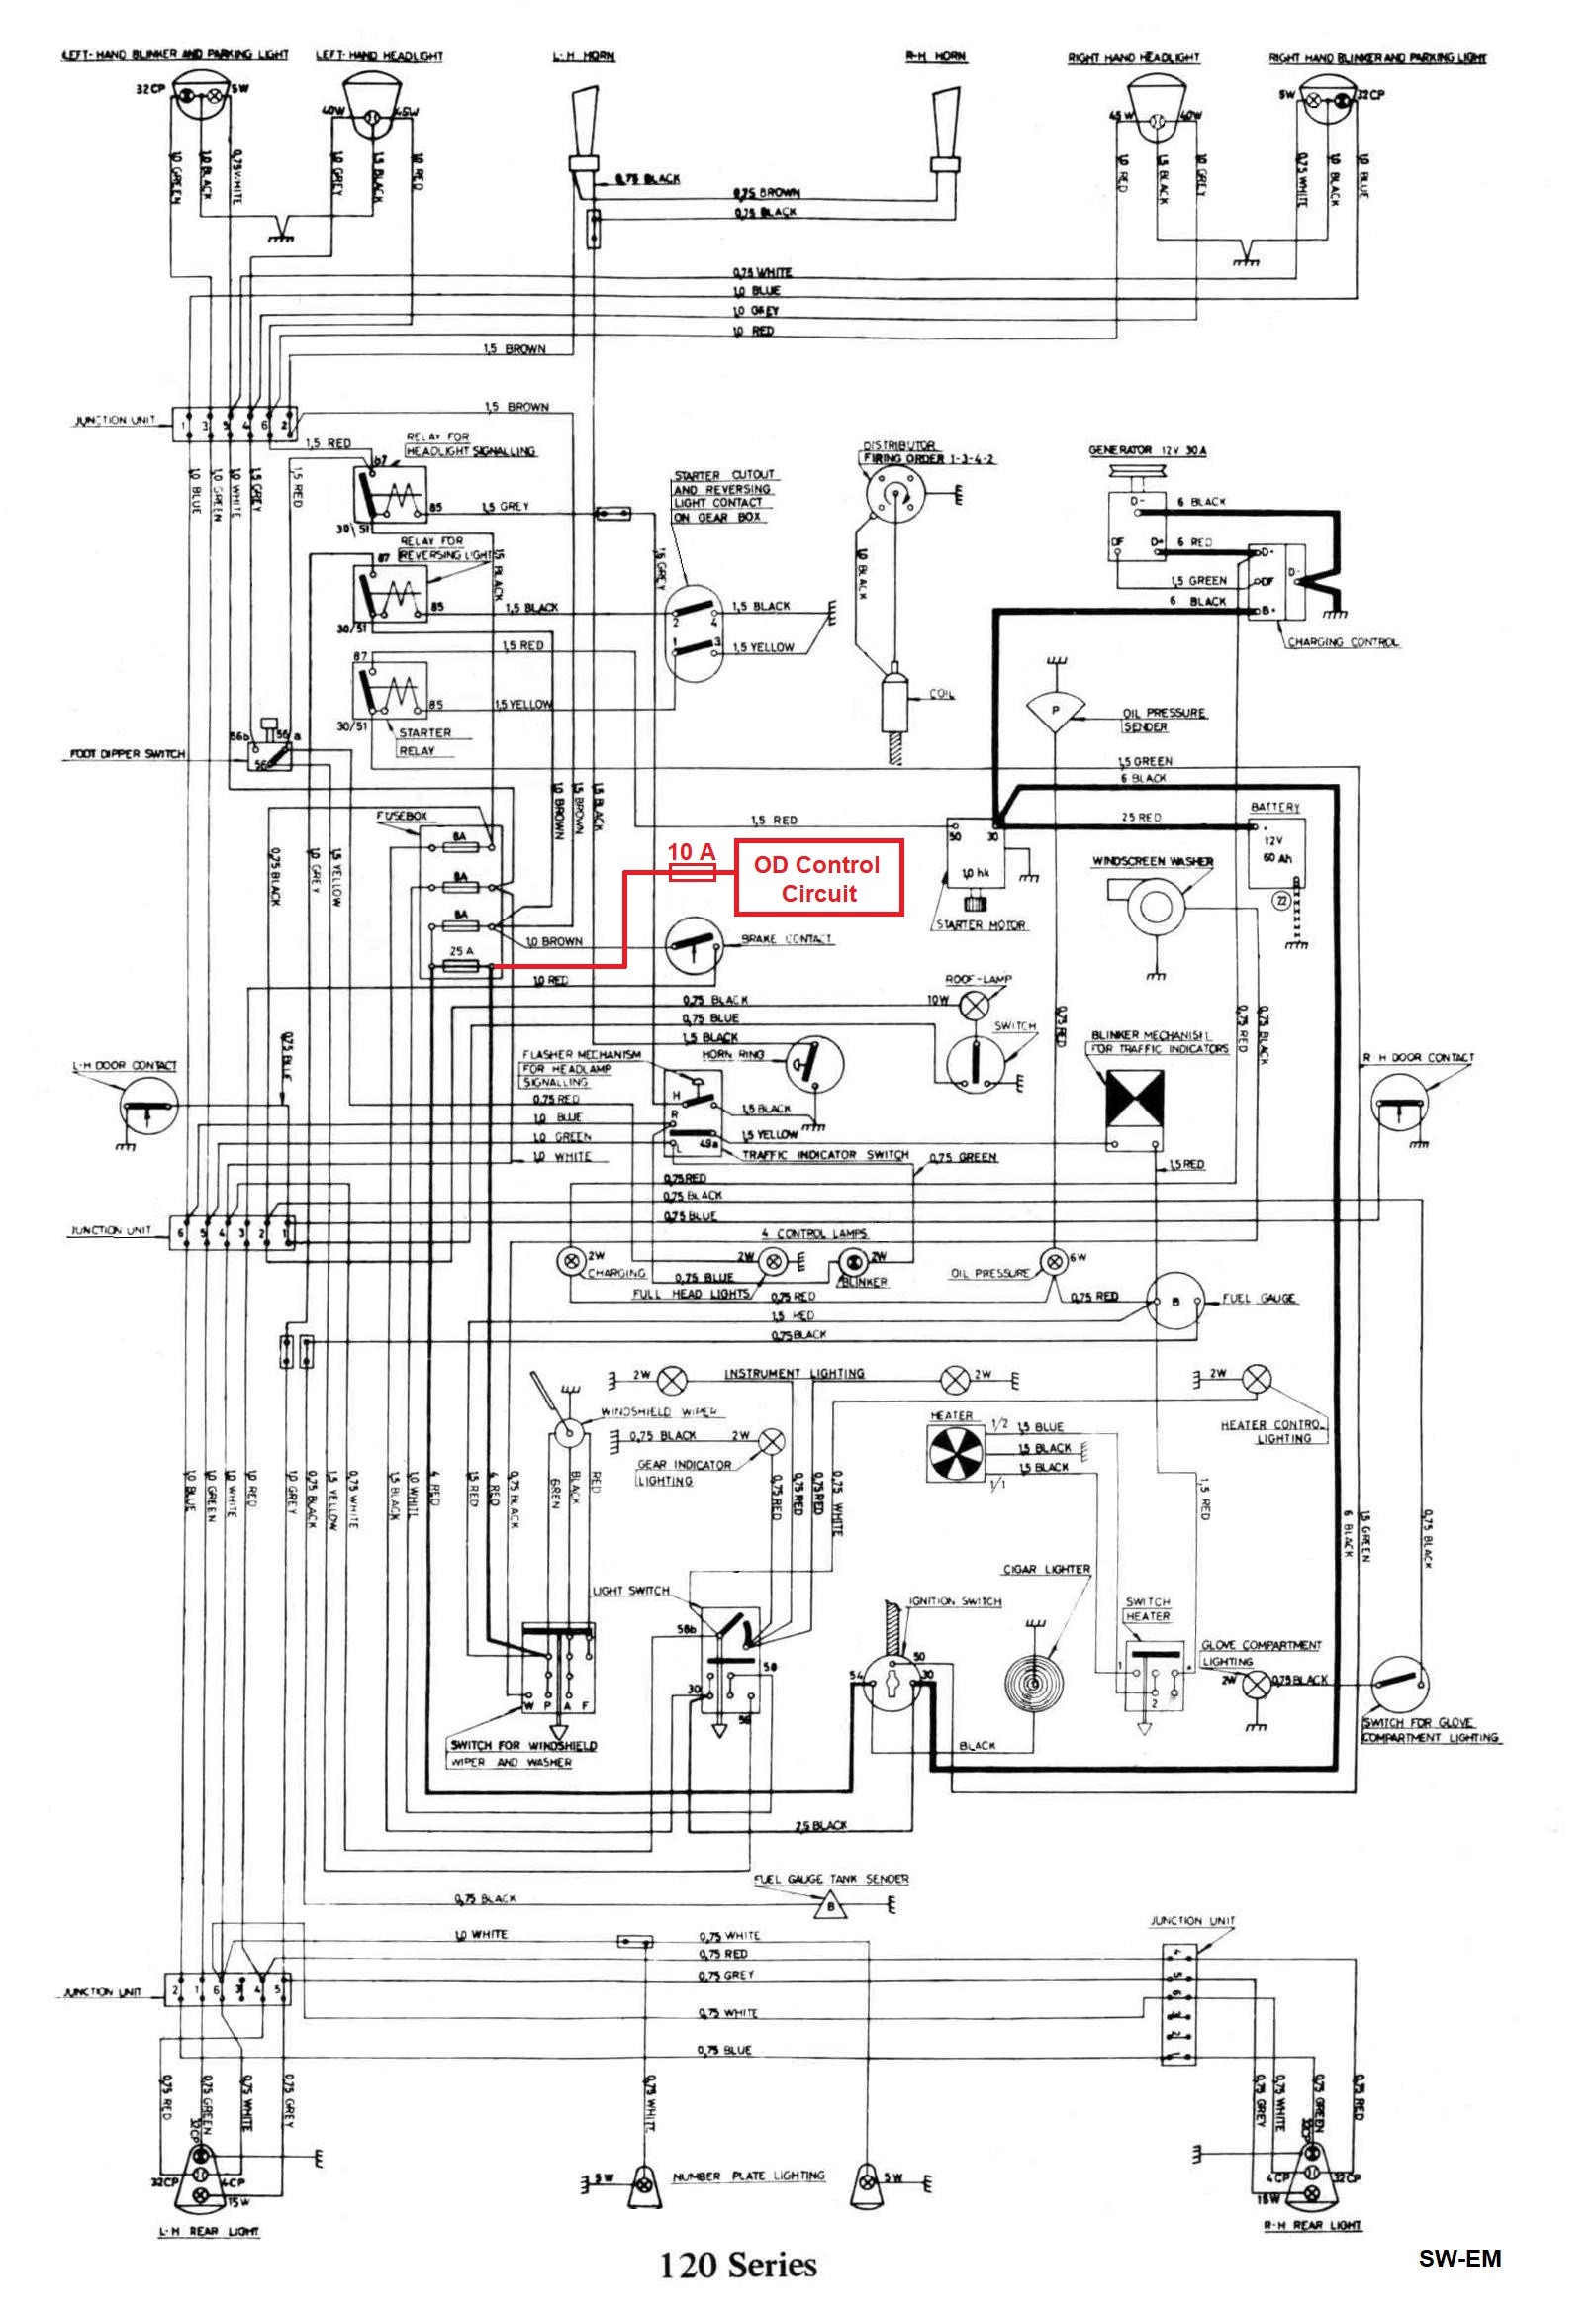 Ignition Coil Diagram Ignition Coil Wiring Diagram Awesome Chevy 350 Ignition Coil Wiring Of Ignition Coil Diagram